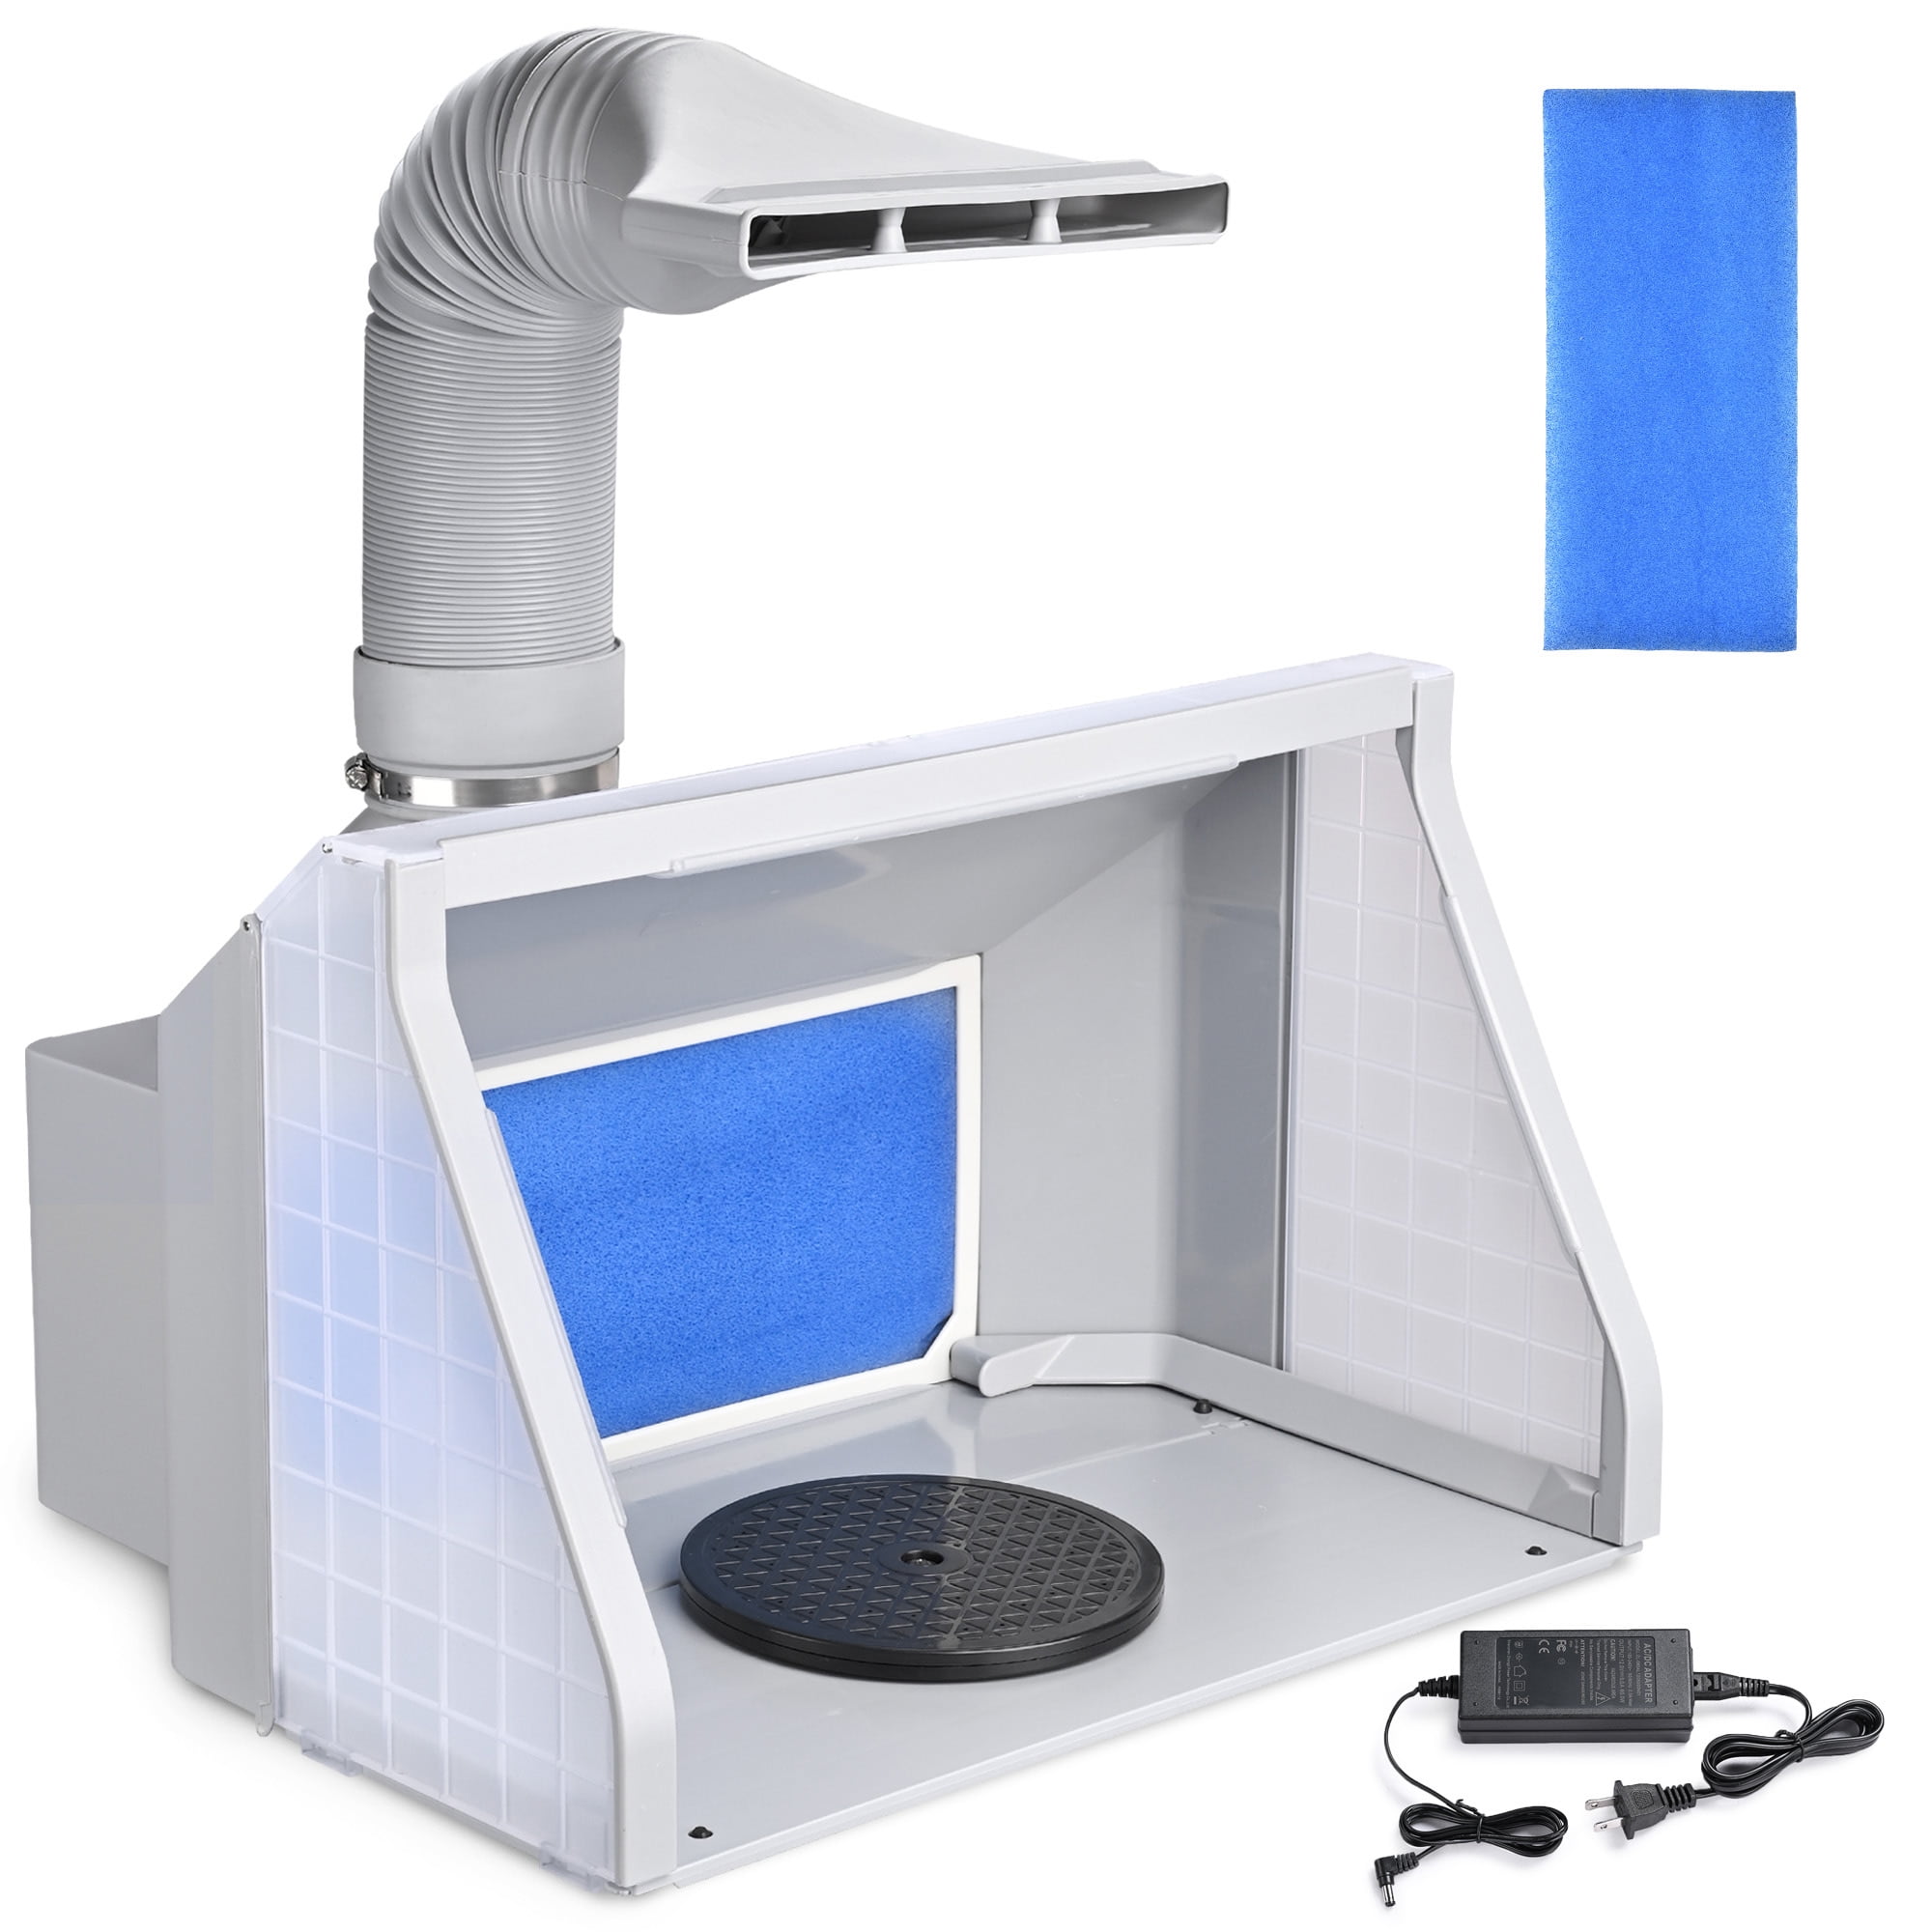 VEVOR Airbrush Spray Booth, Portable Hobby Airbrush Paint Spray Booth Kit  with 4 LED Light, Powerful Dual Exhaust Fans, Turntable and 6 ft Extension